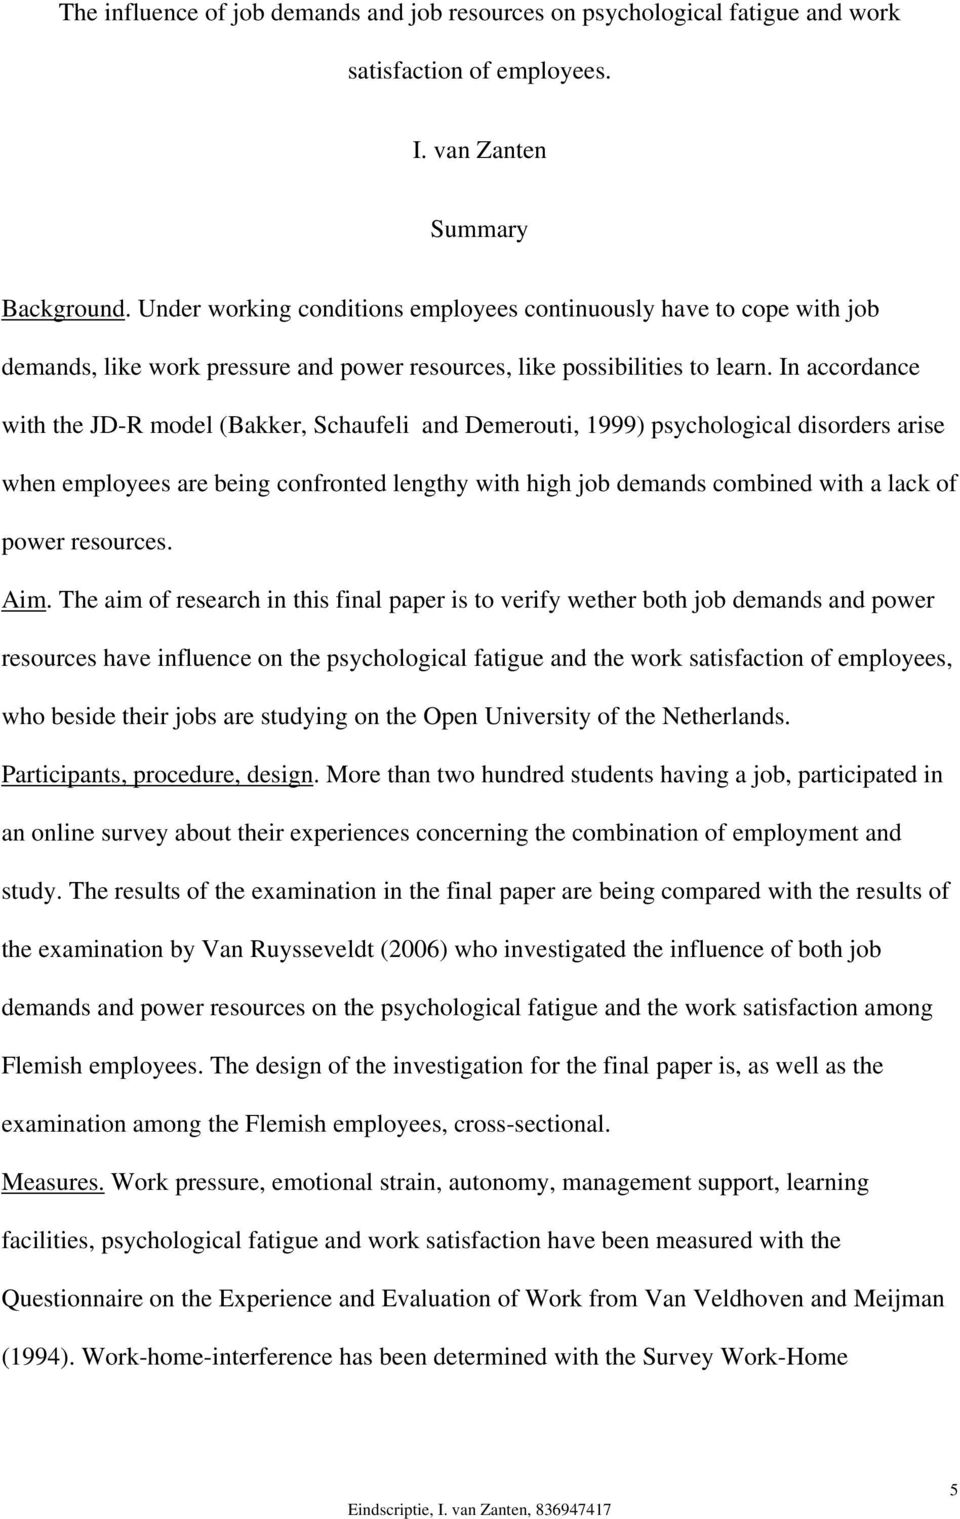 In accordance with the JD-R model (Bakker, Schaufeli and Demerouti, 1999) psychological disorders arise when employees are being confronted lengthy with high job demands combined with a lack of power